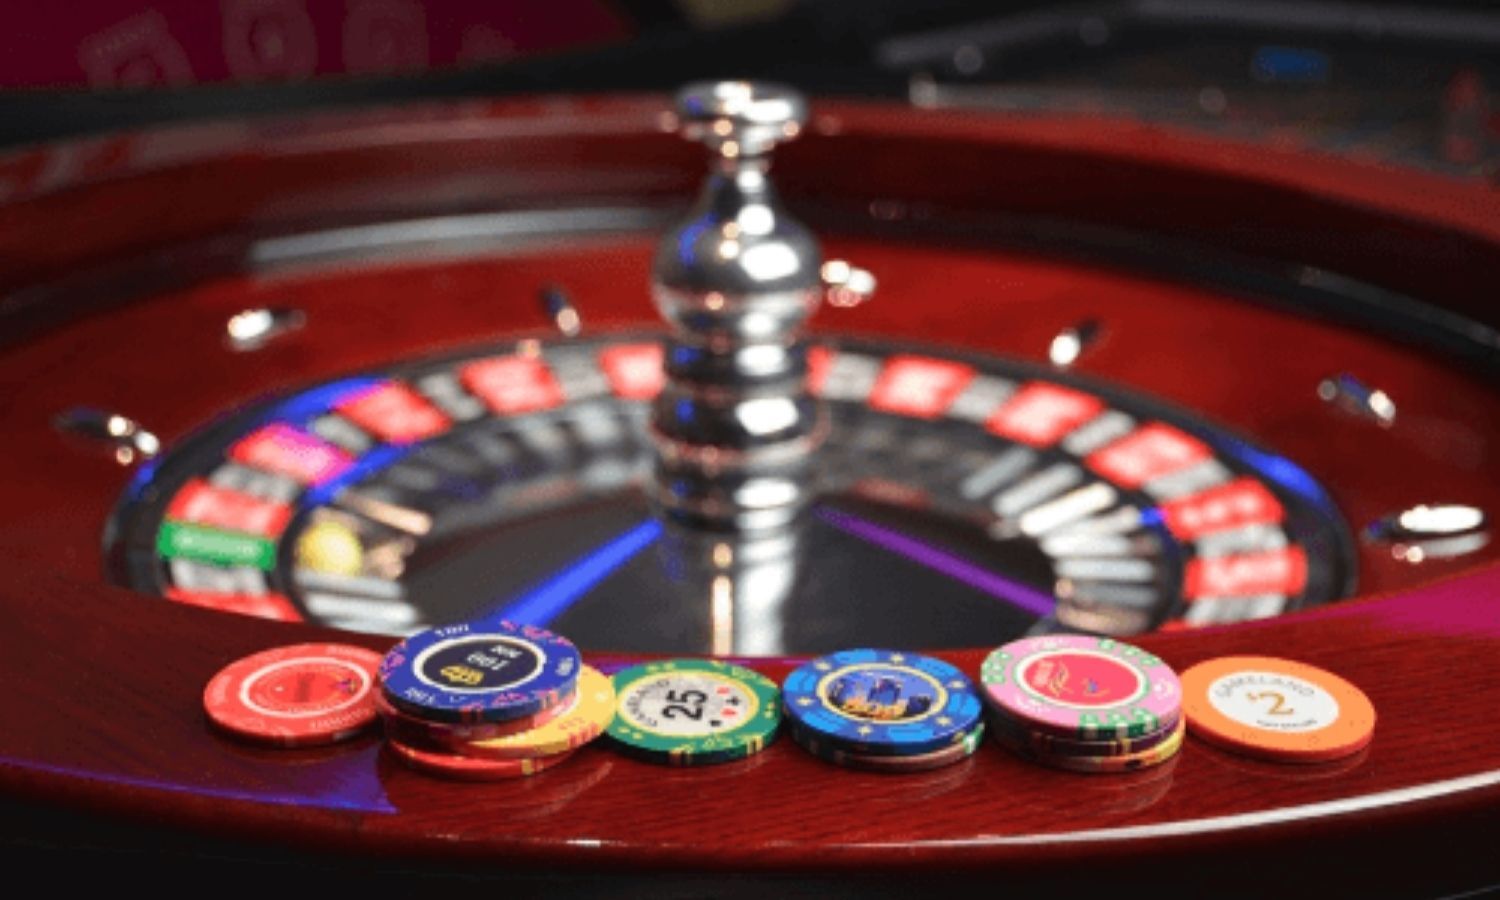 From cellars to the Internet - the emergence of online casinos in India